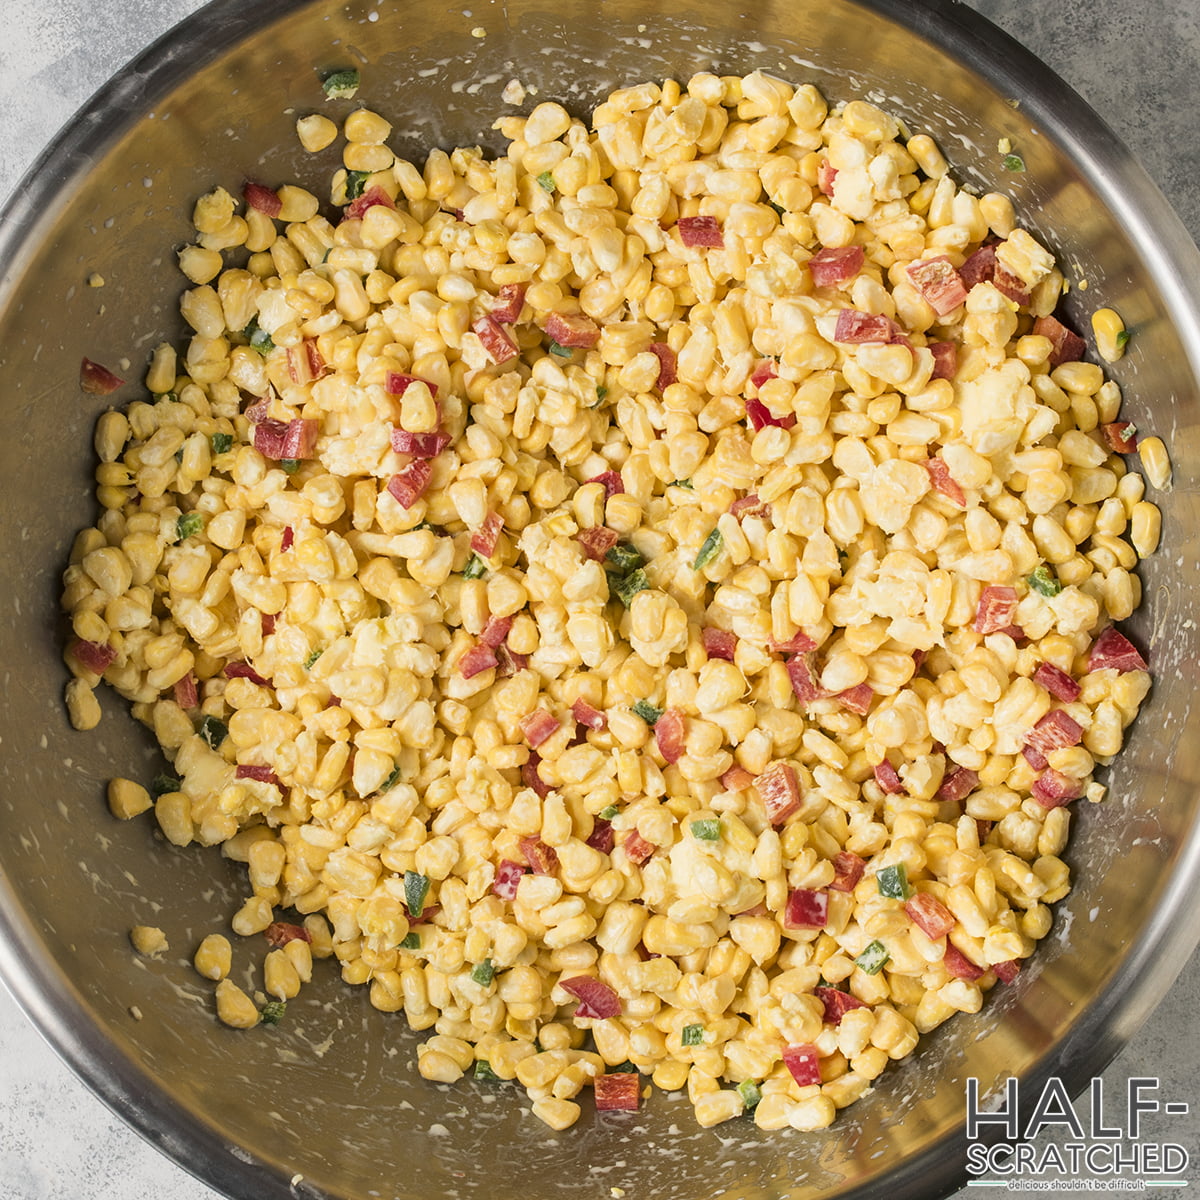 Corn, red bell peppers, jalapenos, and heavy cream mixed in a bowl